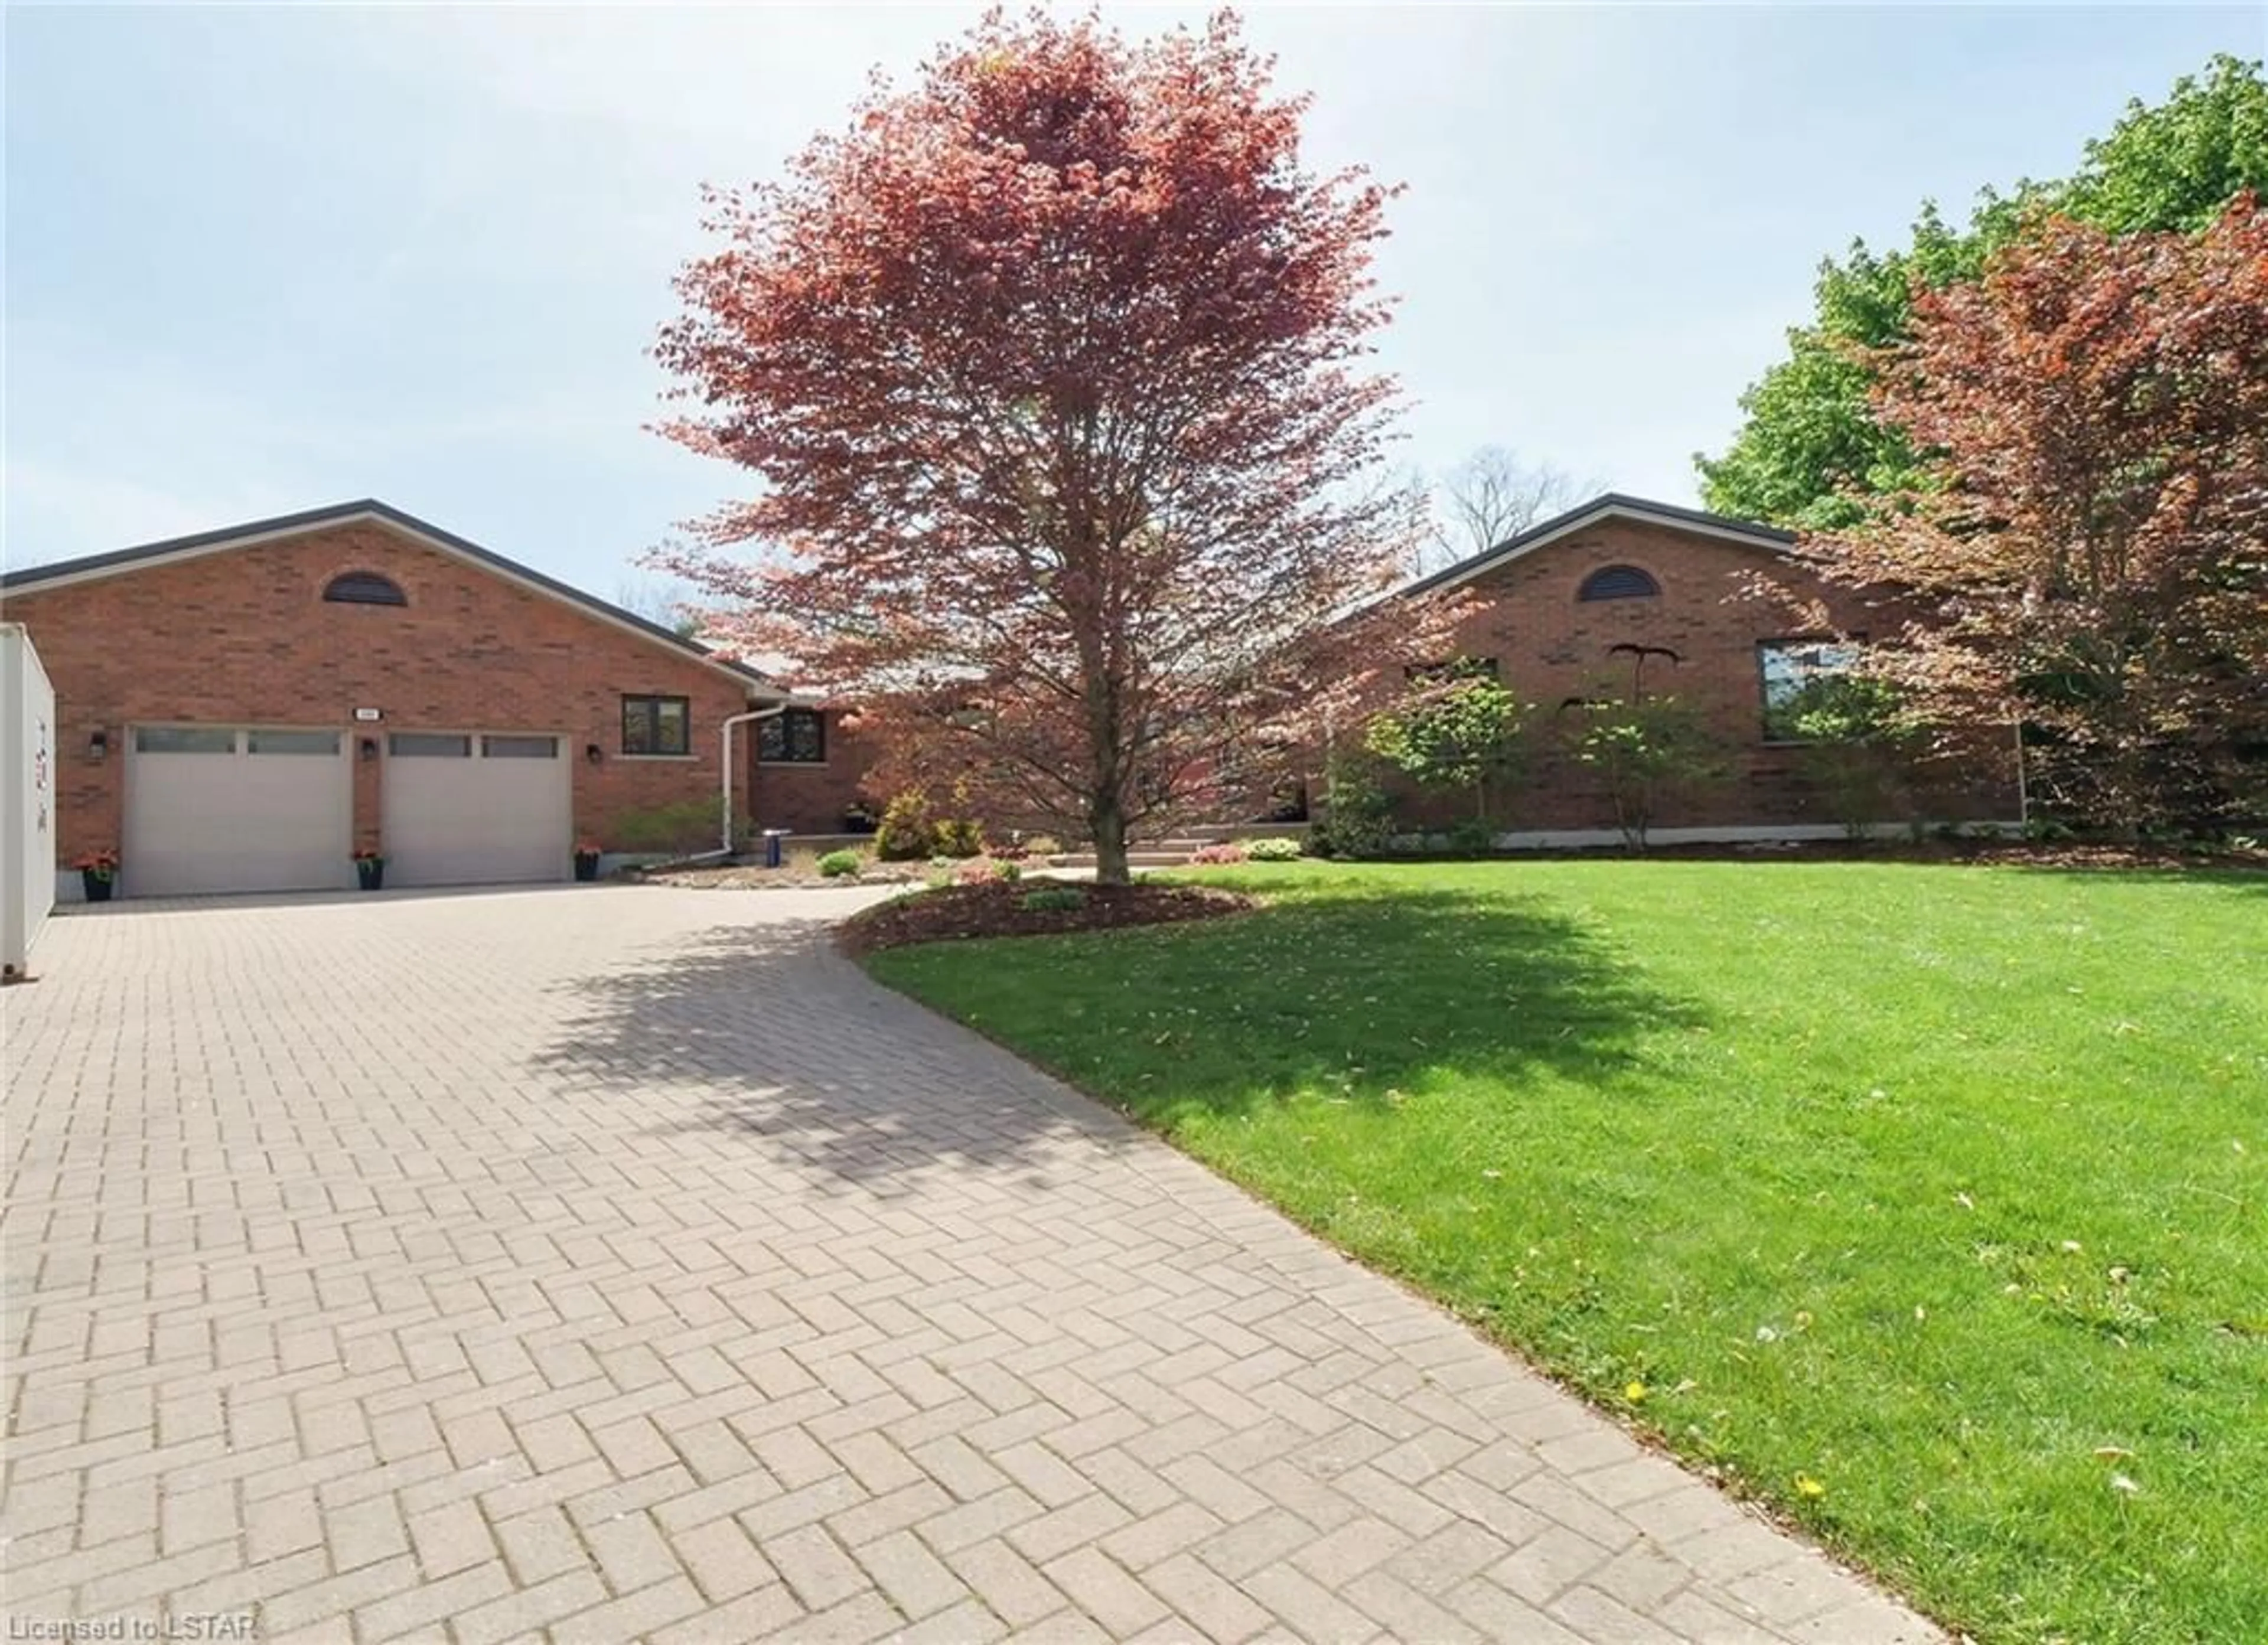 Home with brick exterior material for 3983 Southwinds Crt, London Ontario N6P 1E6